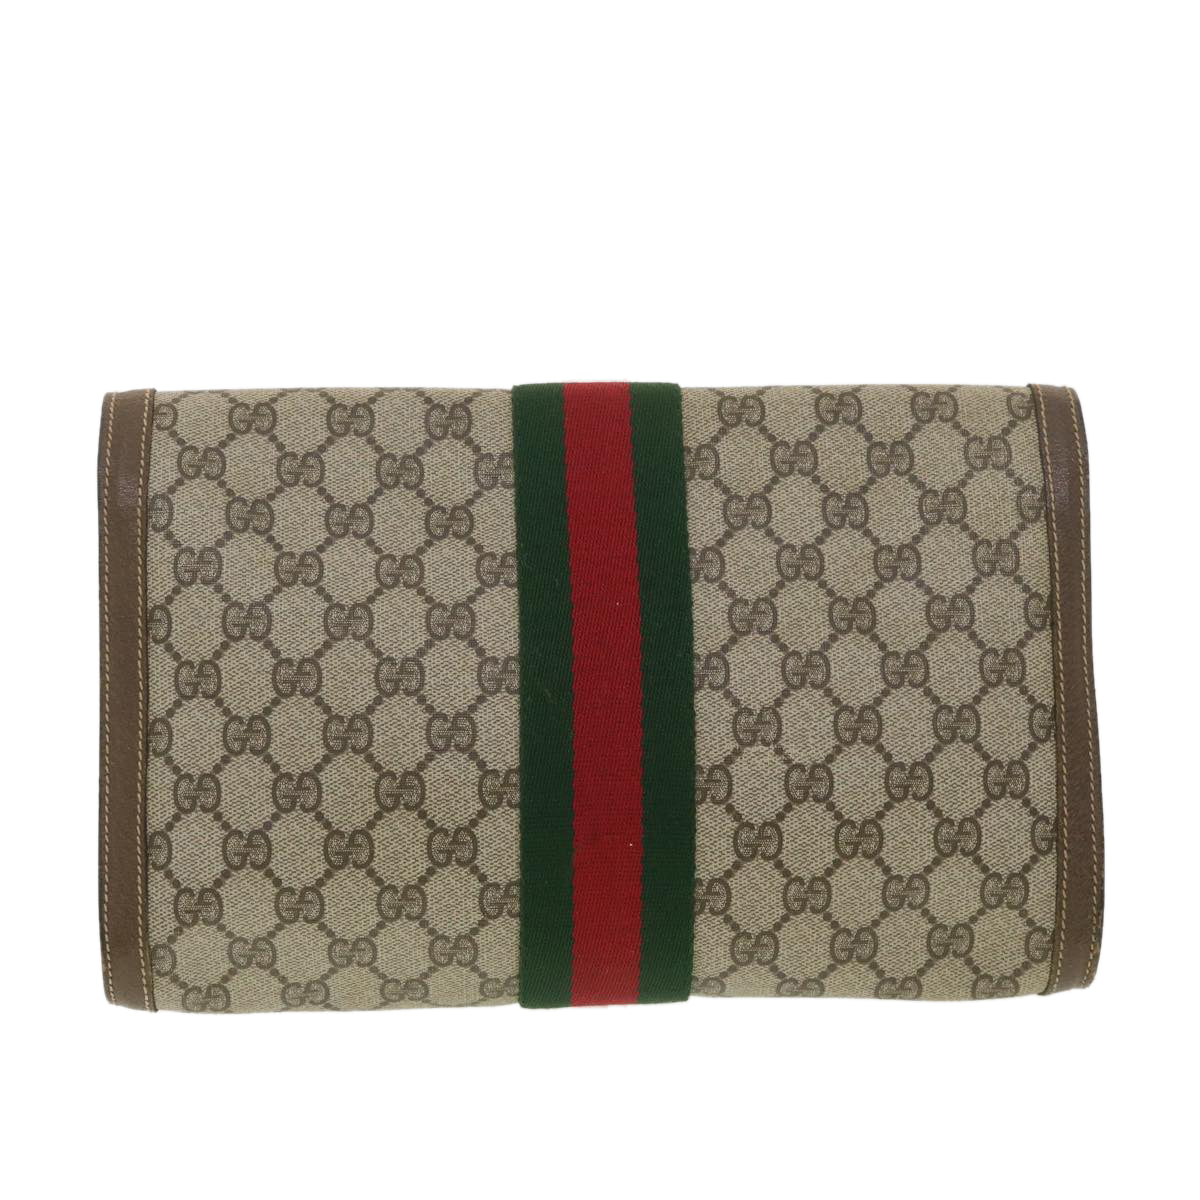 GUCCI GG Canvas Web Sherry Line Clutch Bag Beige Red Green 89.01.007 Auth ny216 - 0